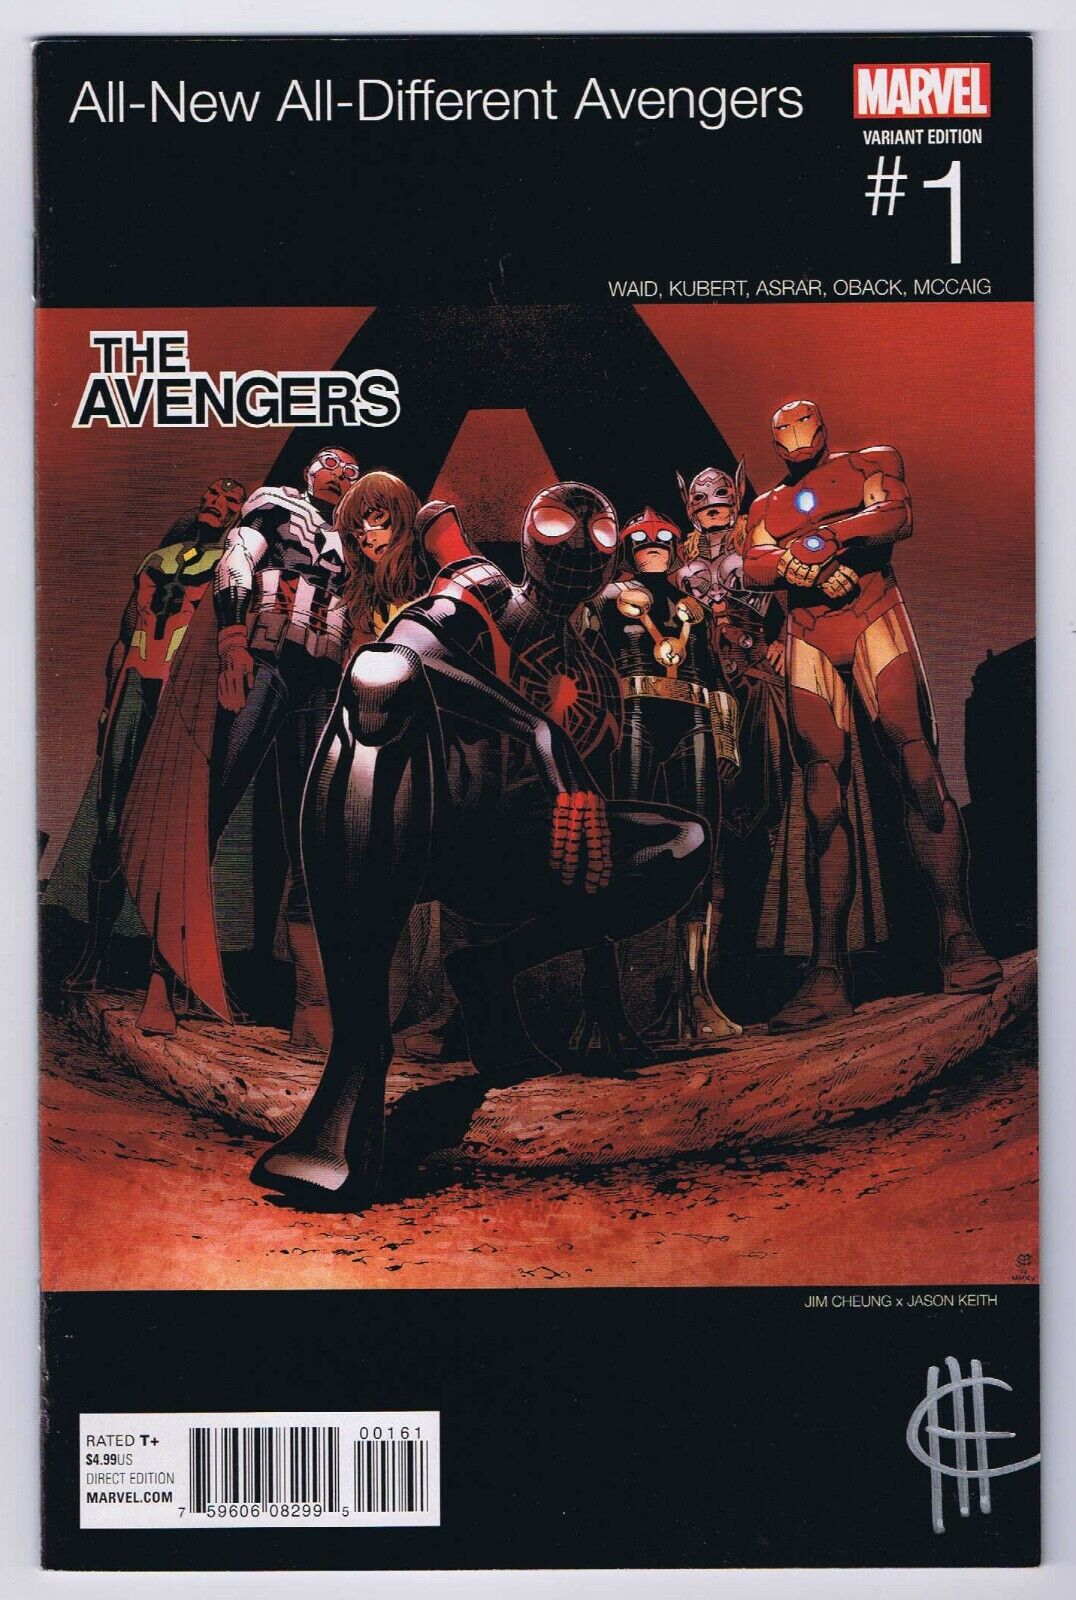 All New All Different Avengers #1 Hip Hop Variant VF/NM Signed w/COA Jim Cheung